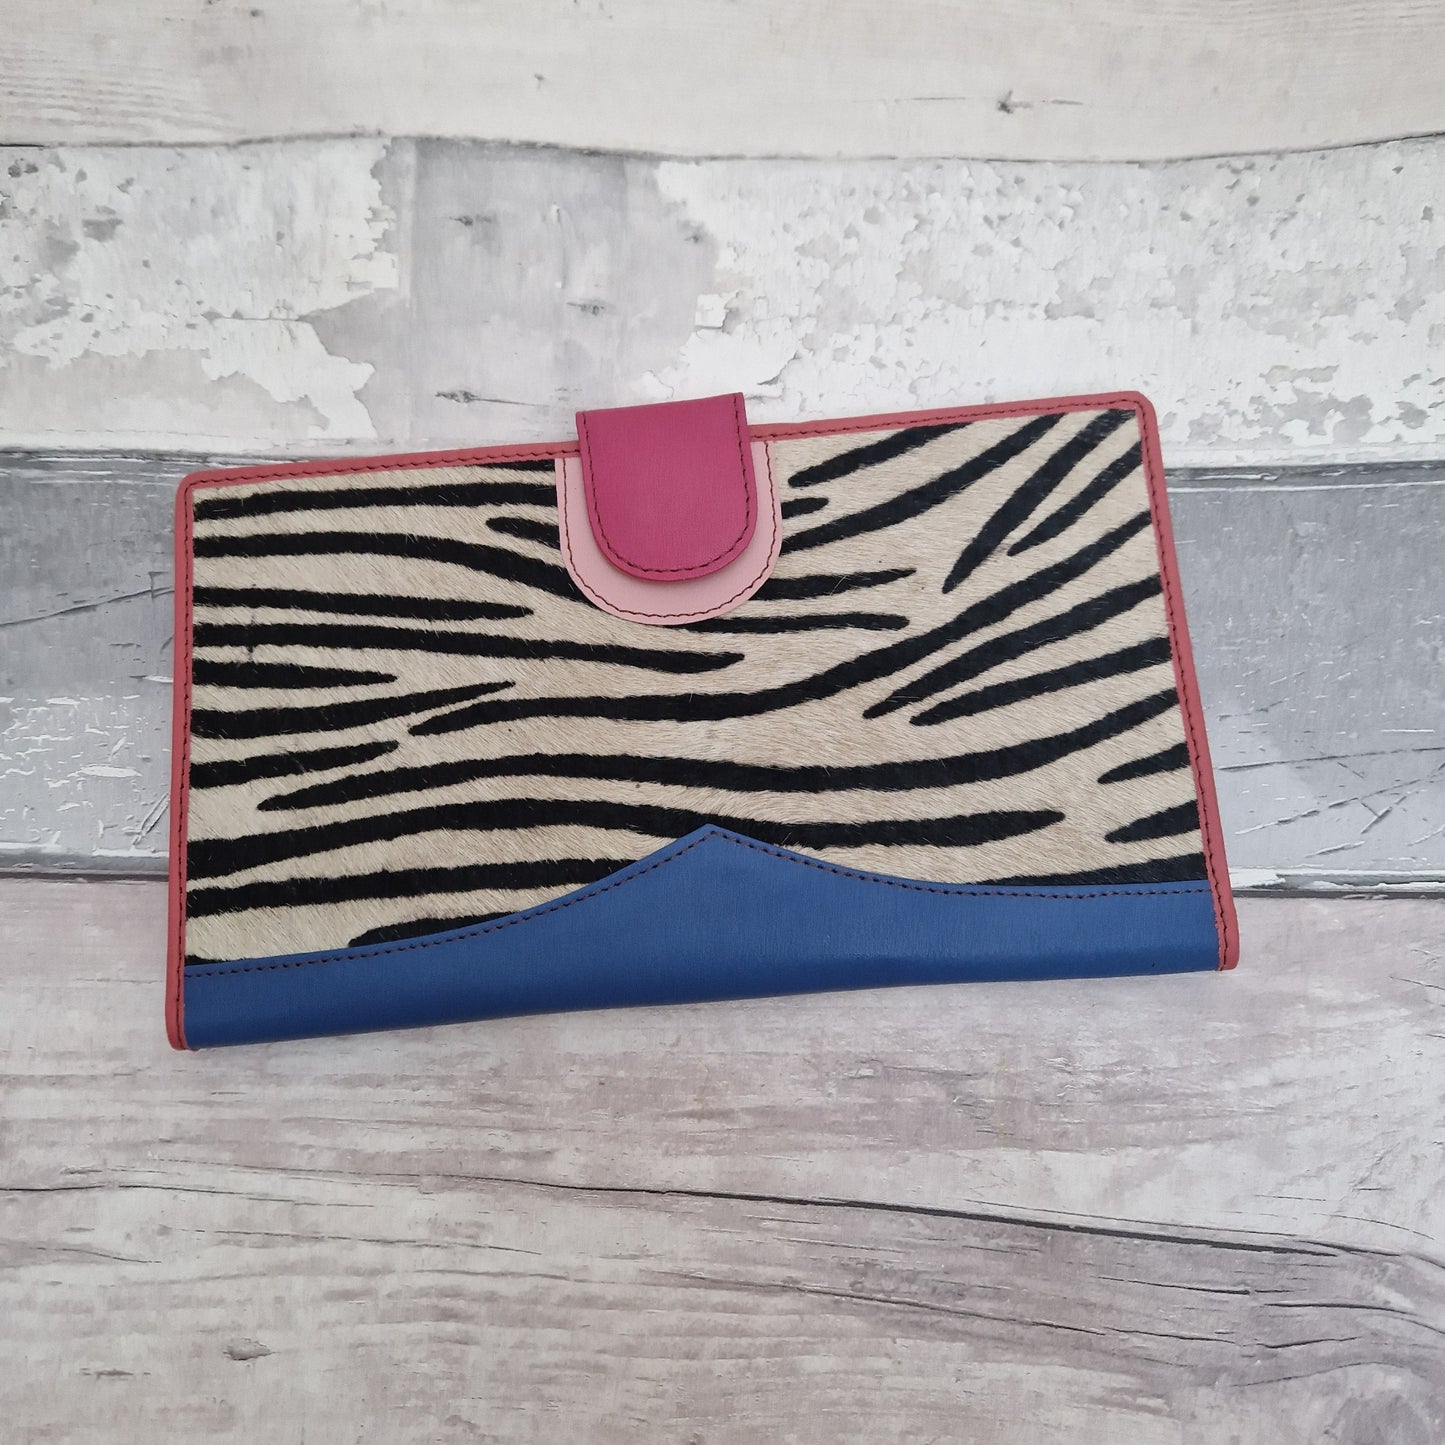 Zebra Print Organiser. All leather with a textured finish.